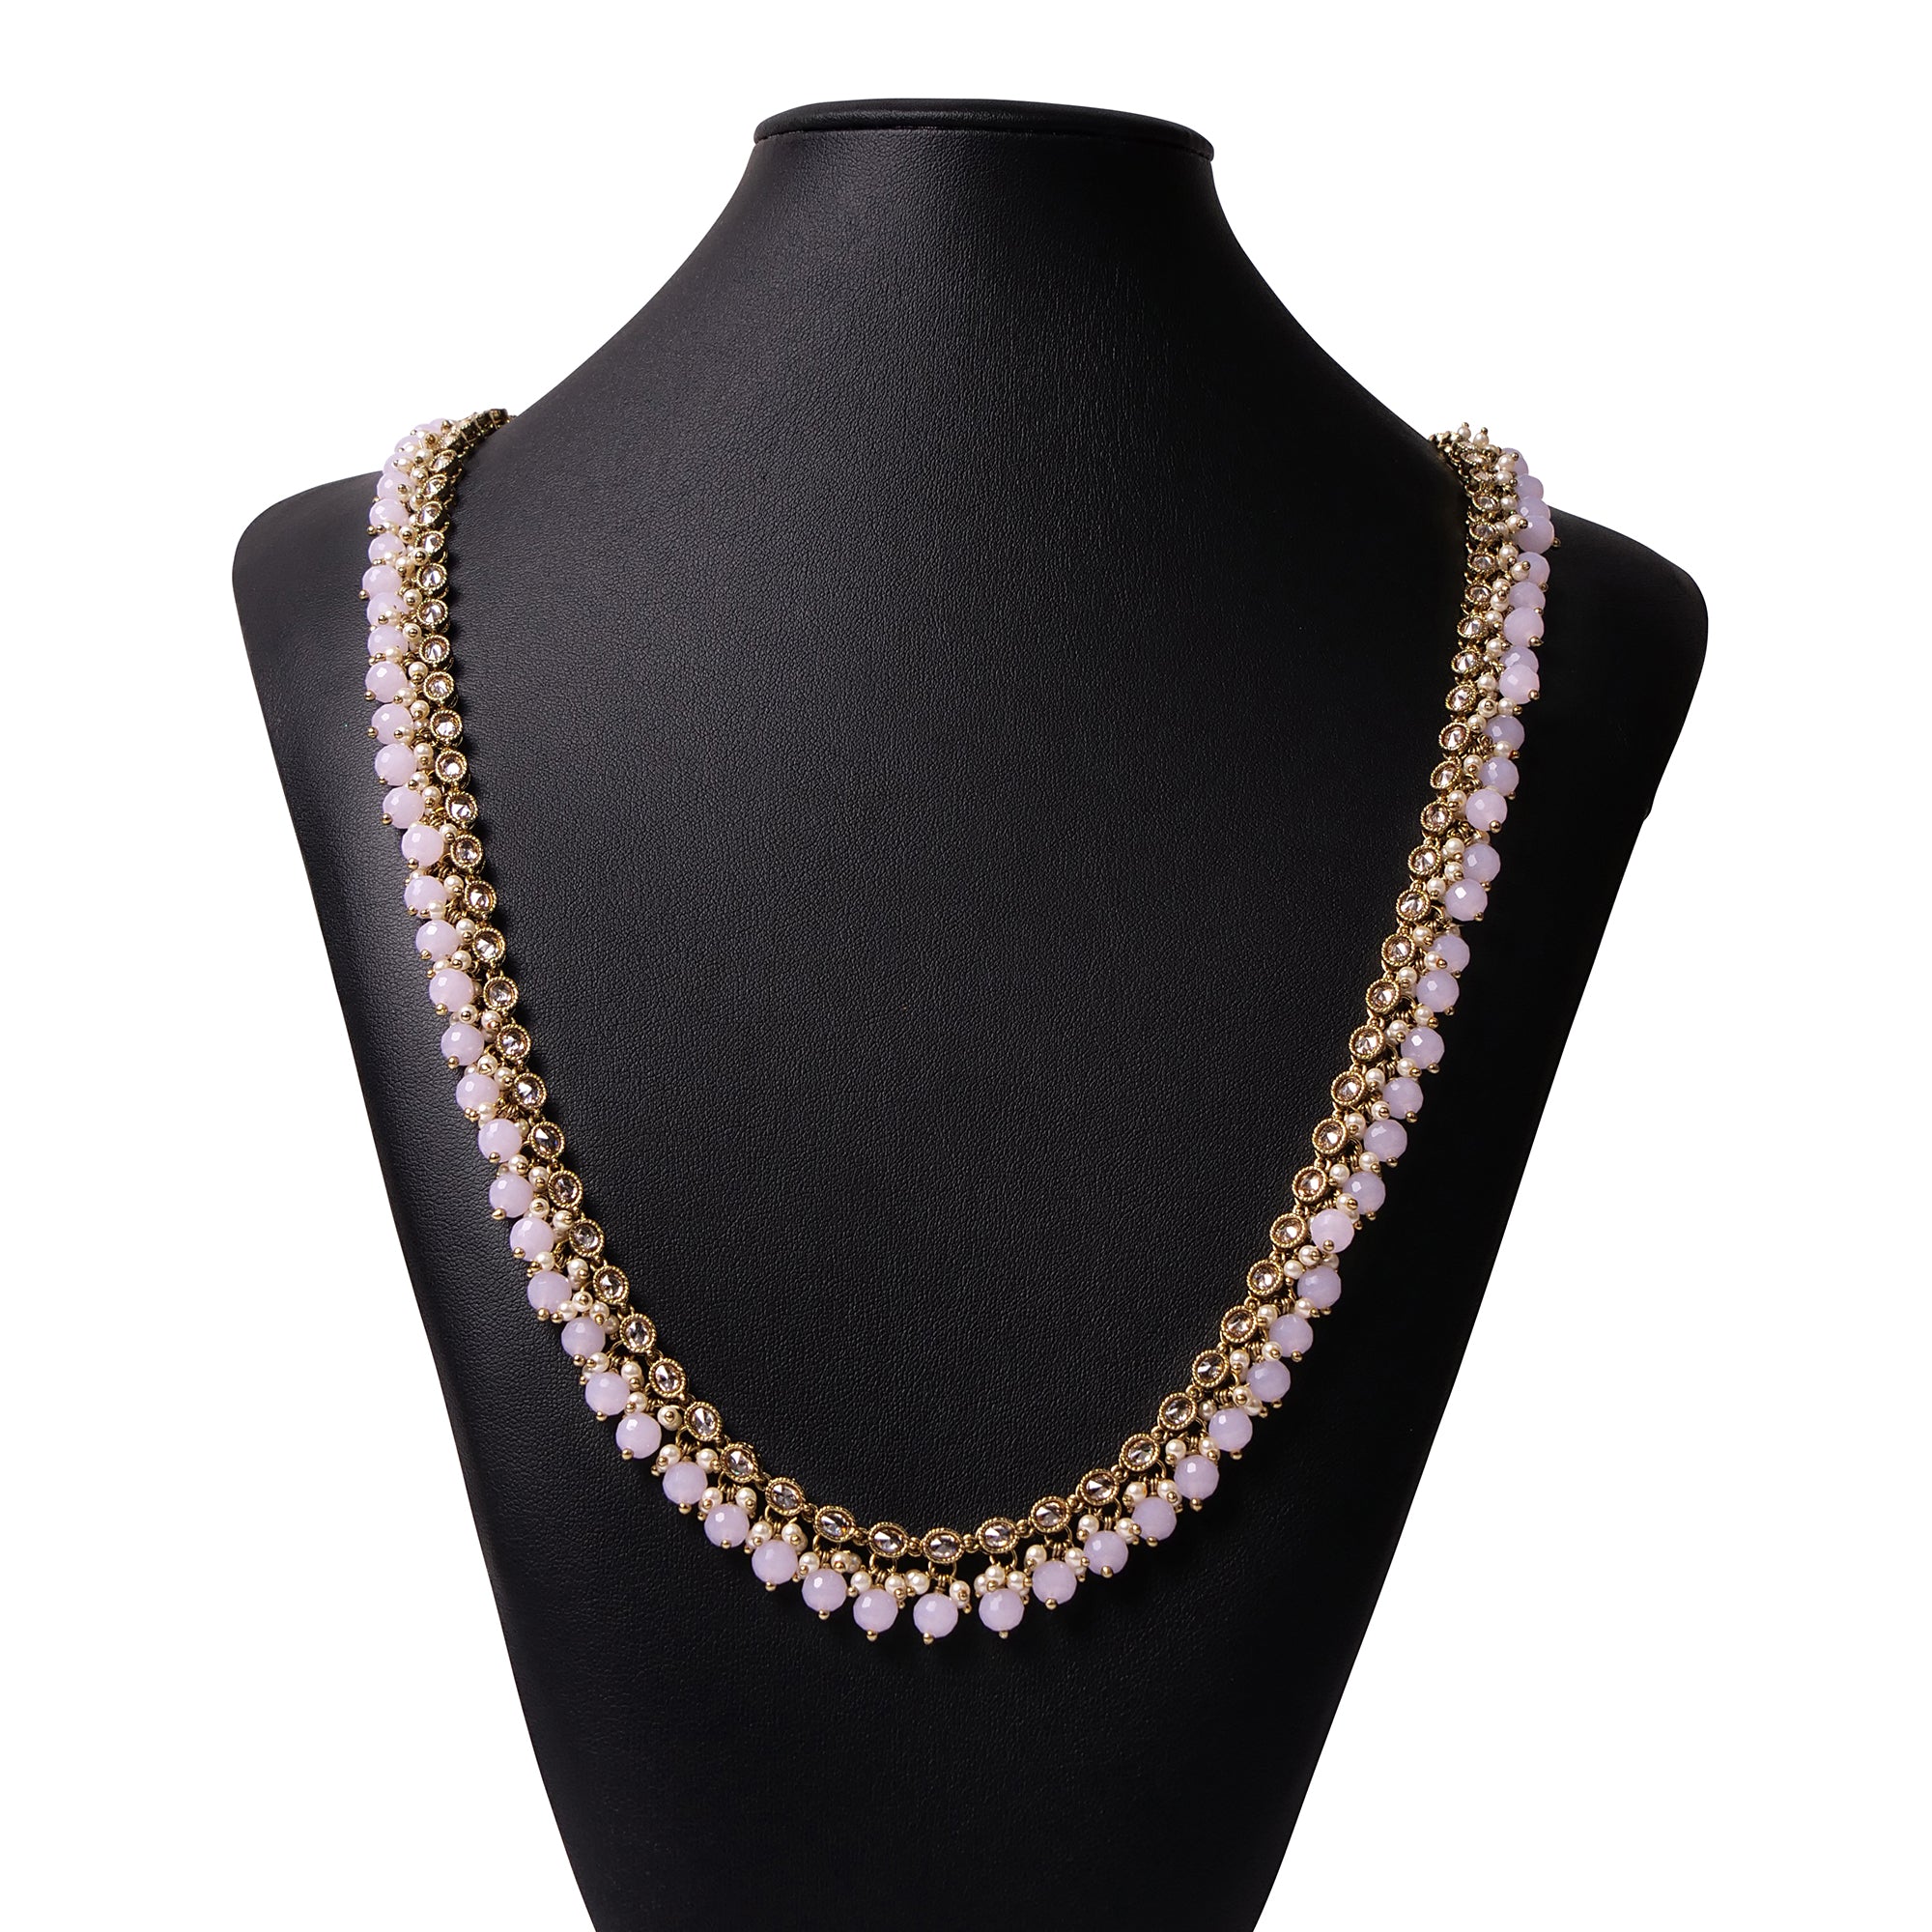 Layla Long Chain in Light Pink